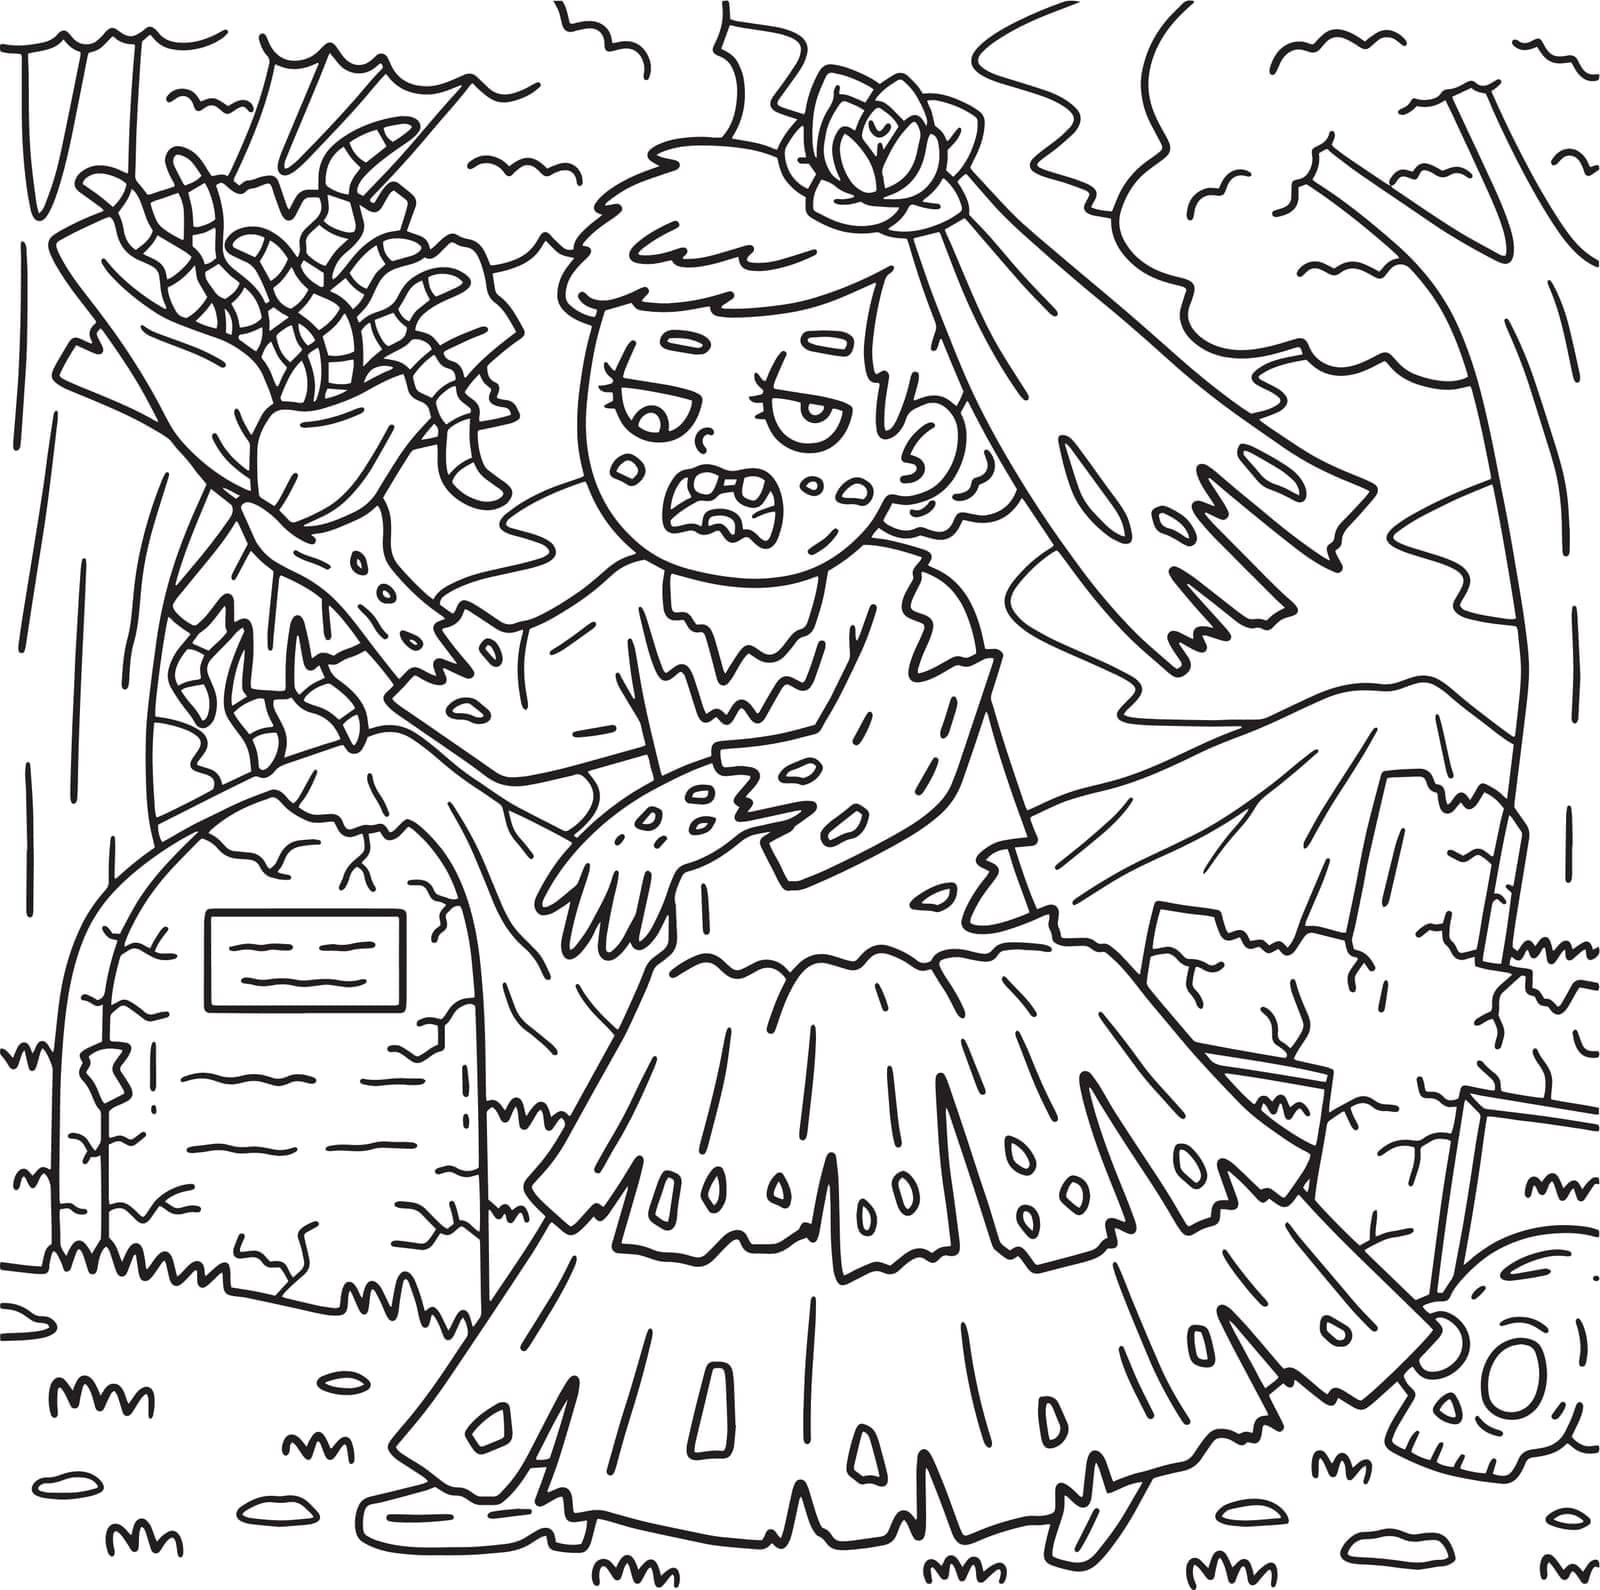 Zombie Bride Coloring Pages for Kids by abbydesign